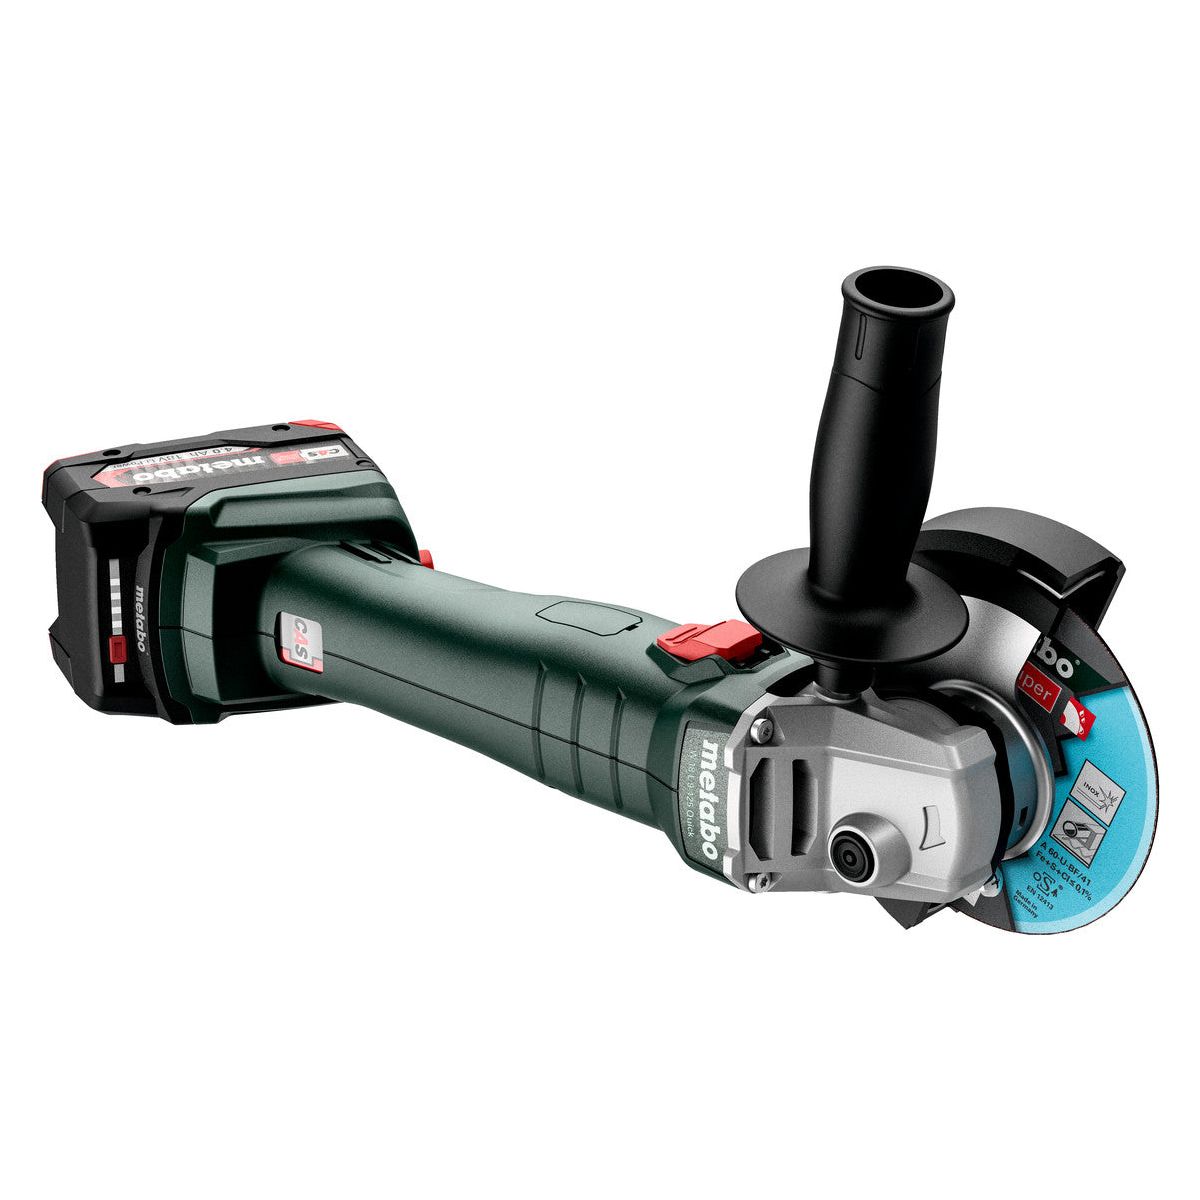 Meuleuse d'angle W 18 L 9-125 Metabo (avec chargeur + 2 batteries + metaBOX)